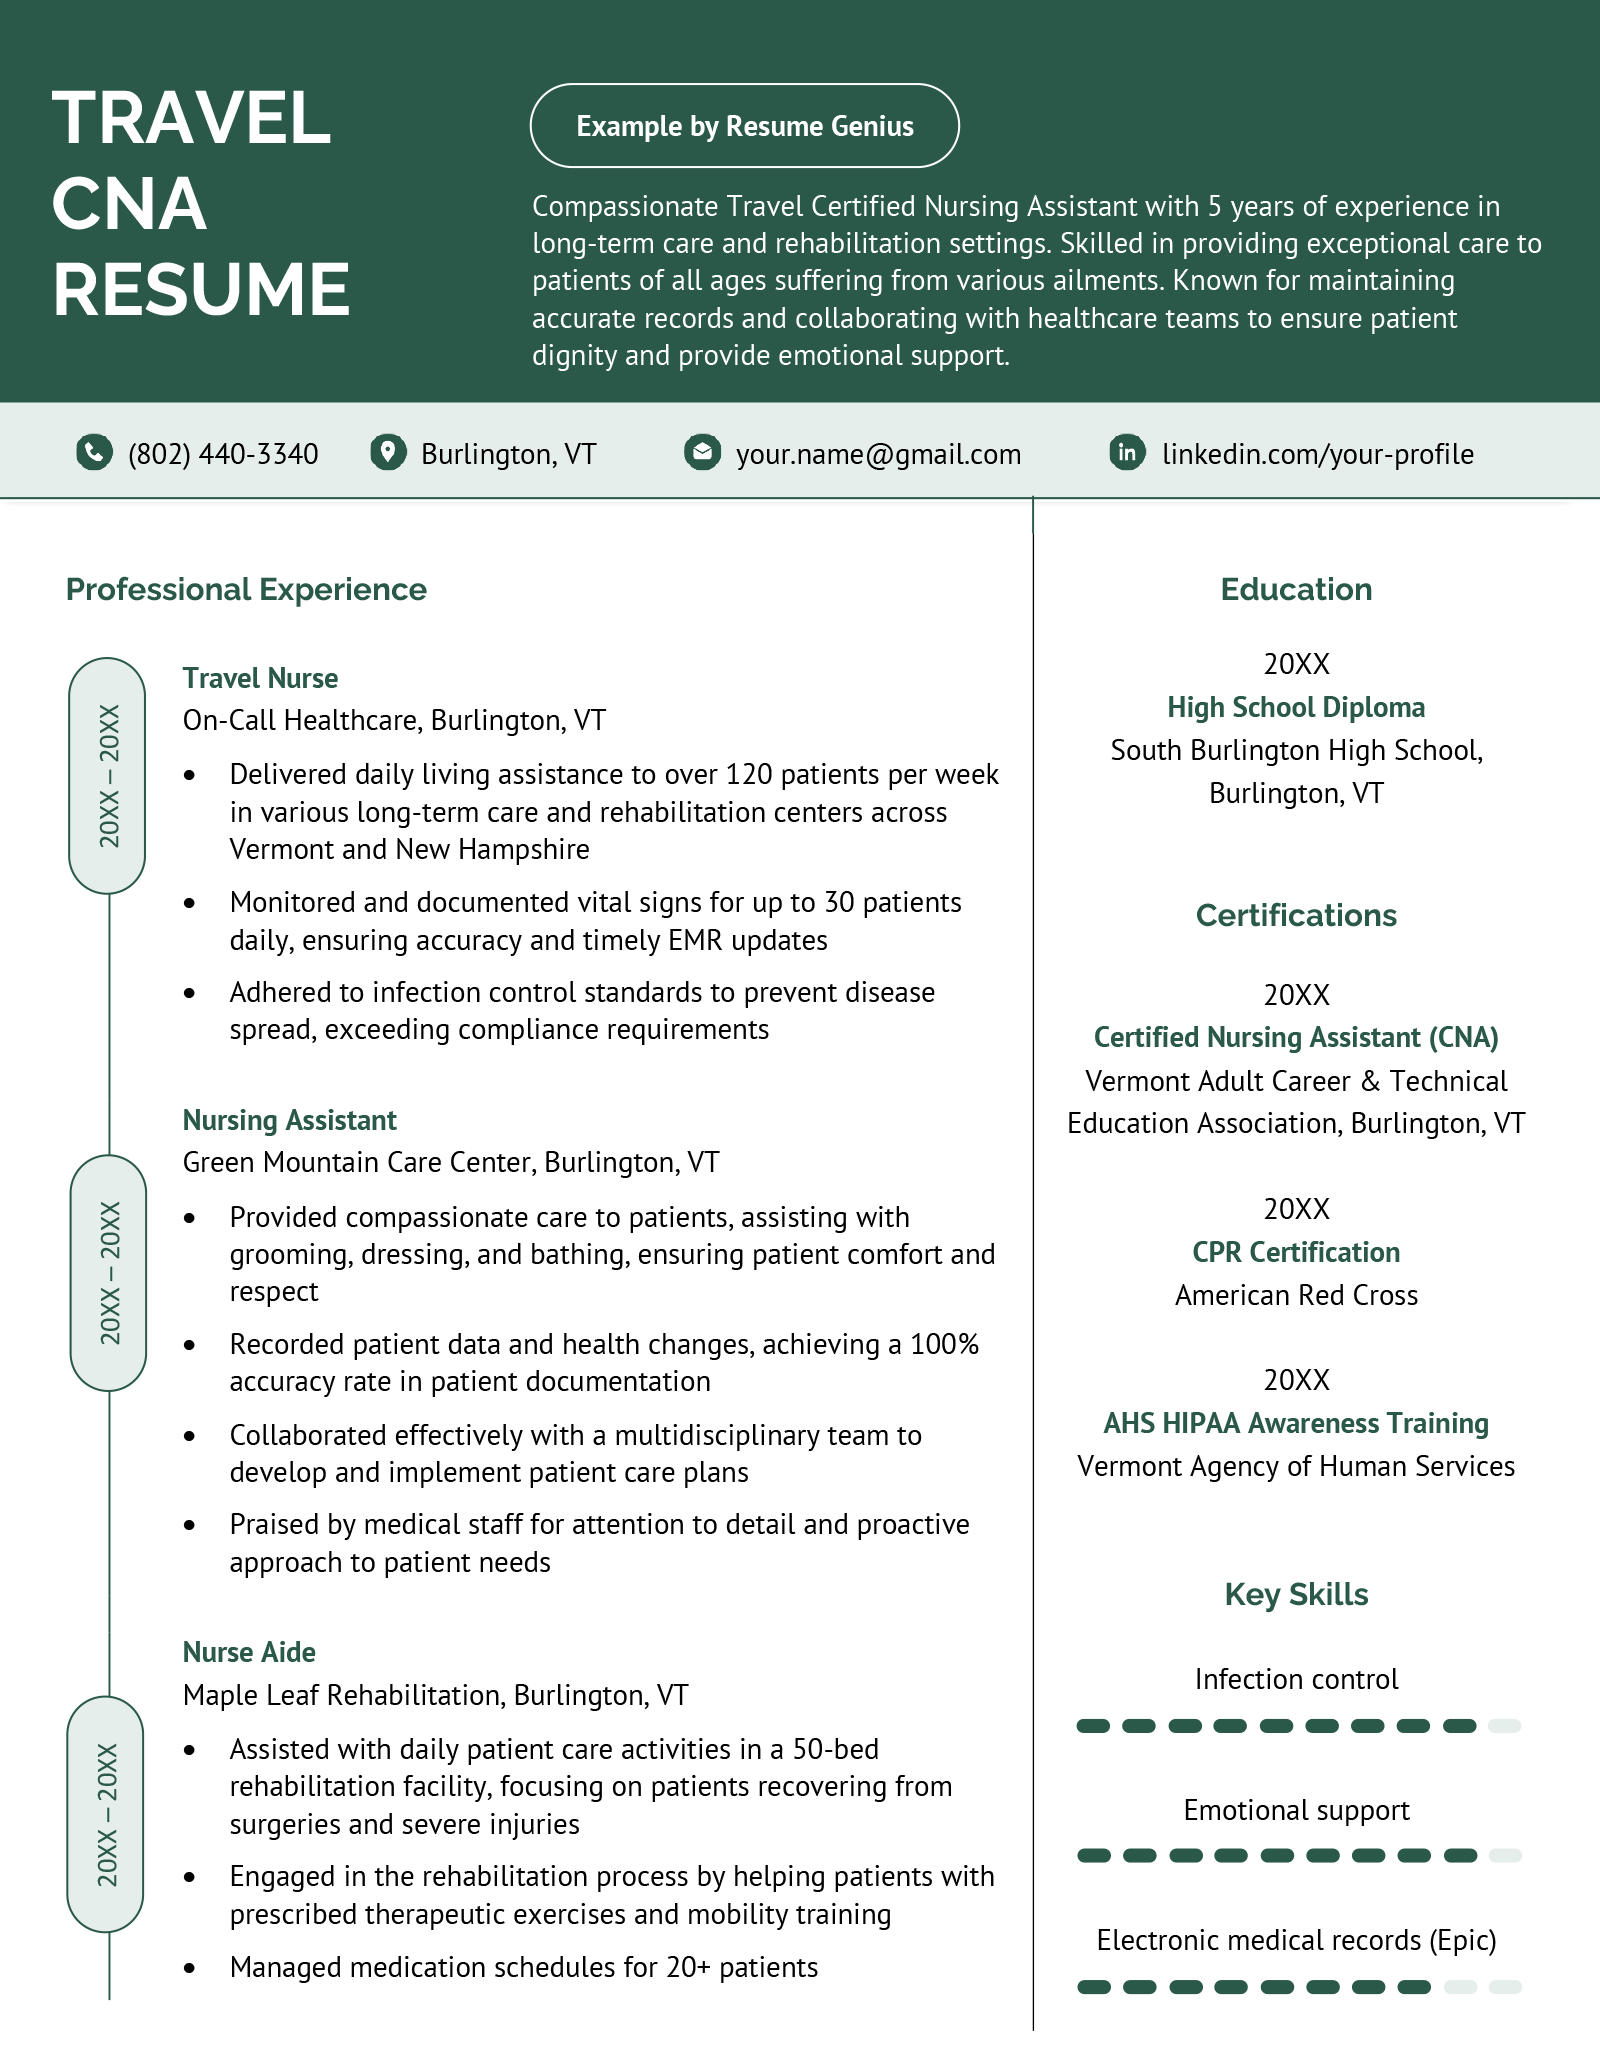 A travel CNA resume example with a green header and a timeline-style work experience section